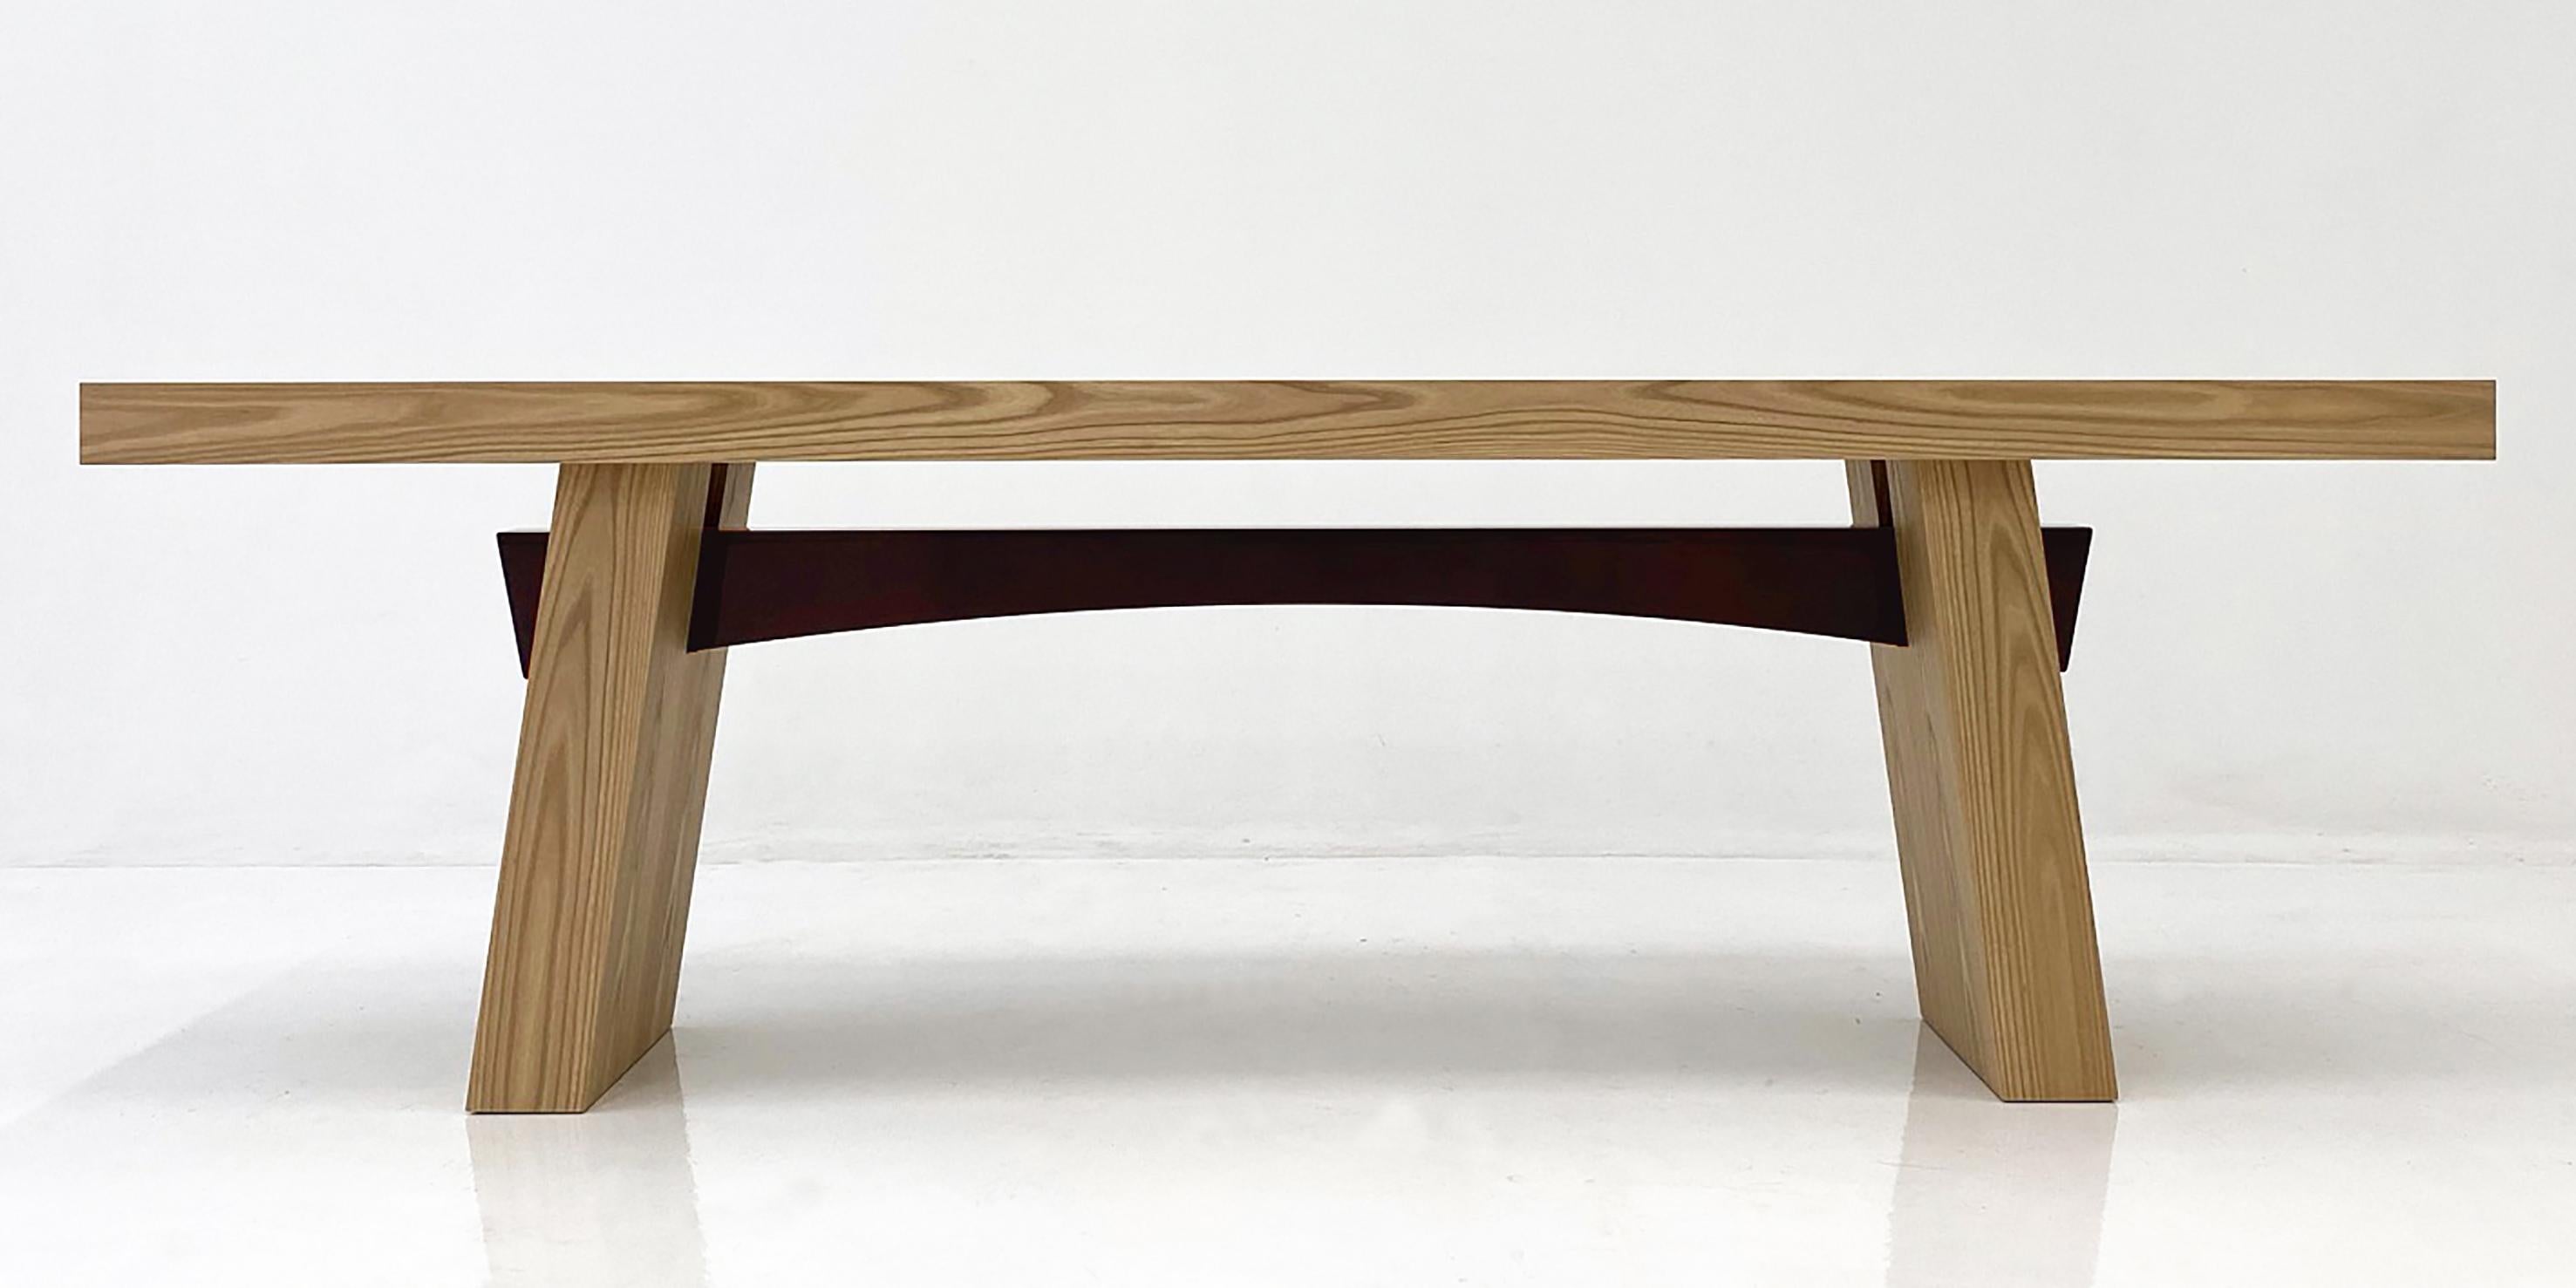 A console of generous proportions with a distinctly thick top and angled legs. Its sleek design is enhanced and enriched by the curve of its contrasting lacquered beam.

Finished in Elm wood, with a dark-red gloss-lacquered beam, the WA console it